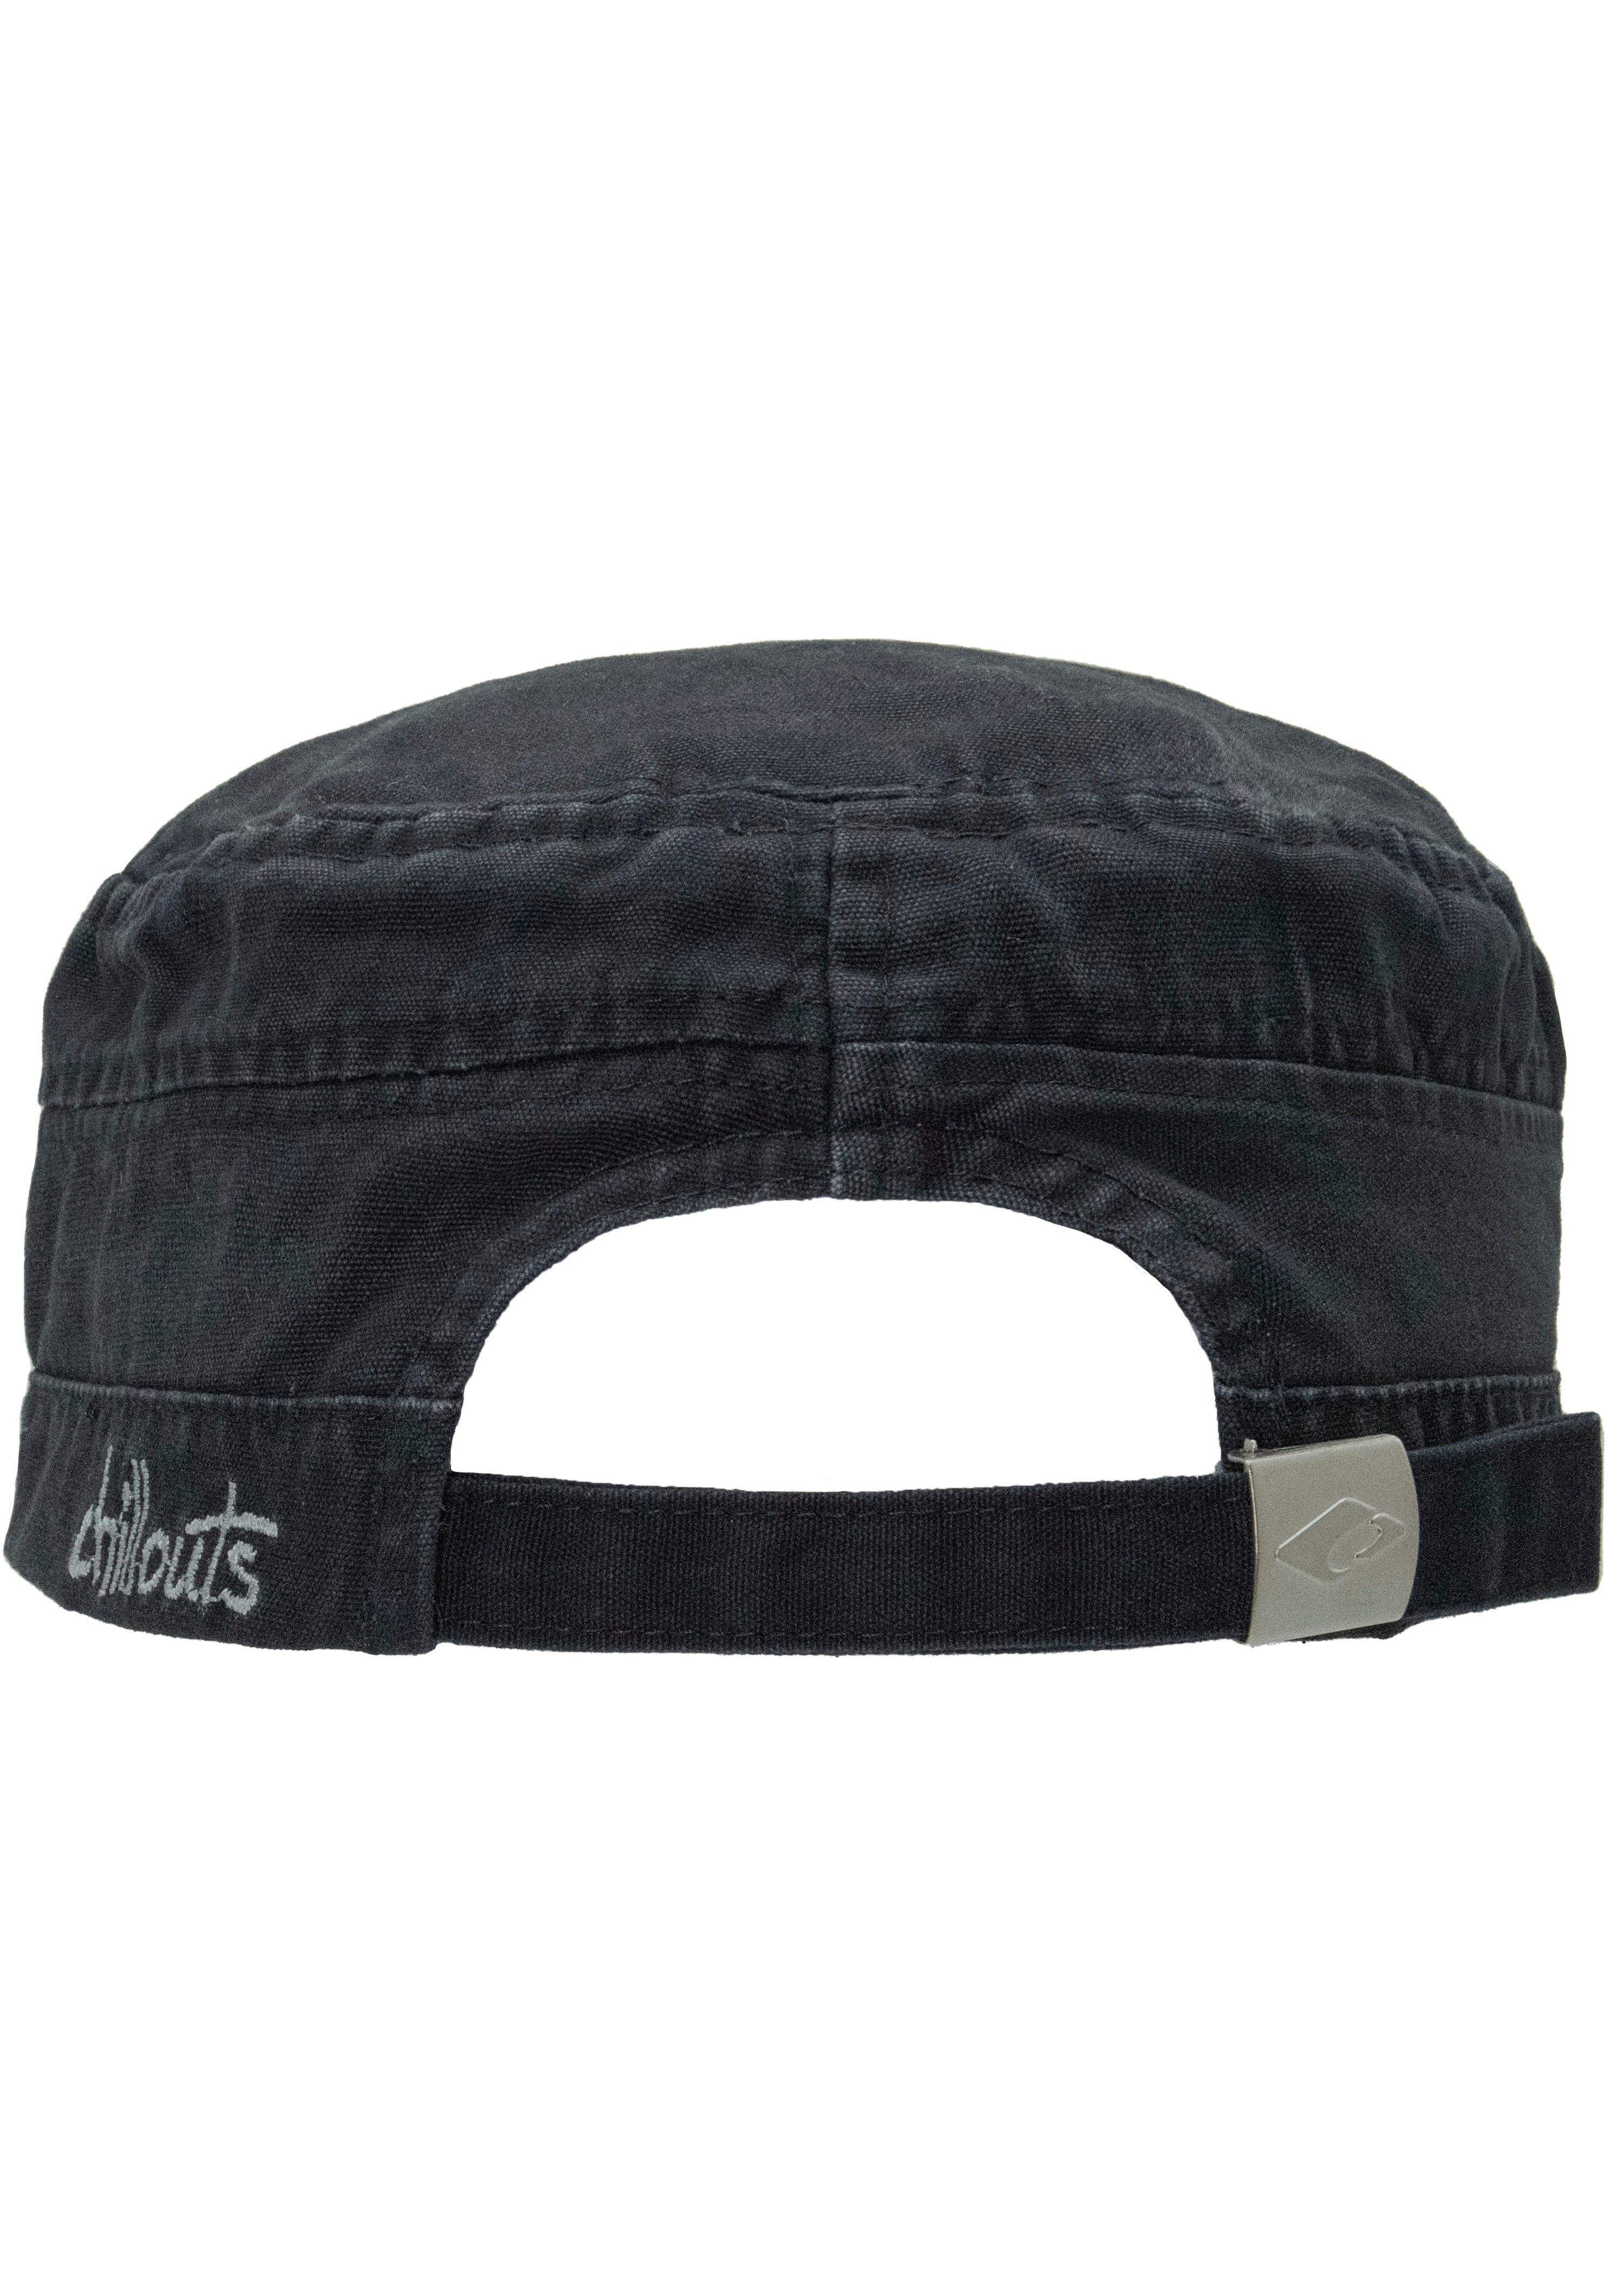 Baumwolle, Size Hat chillouts One El atmungsaktiv, navy washed reiner Army Cap aus Paso